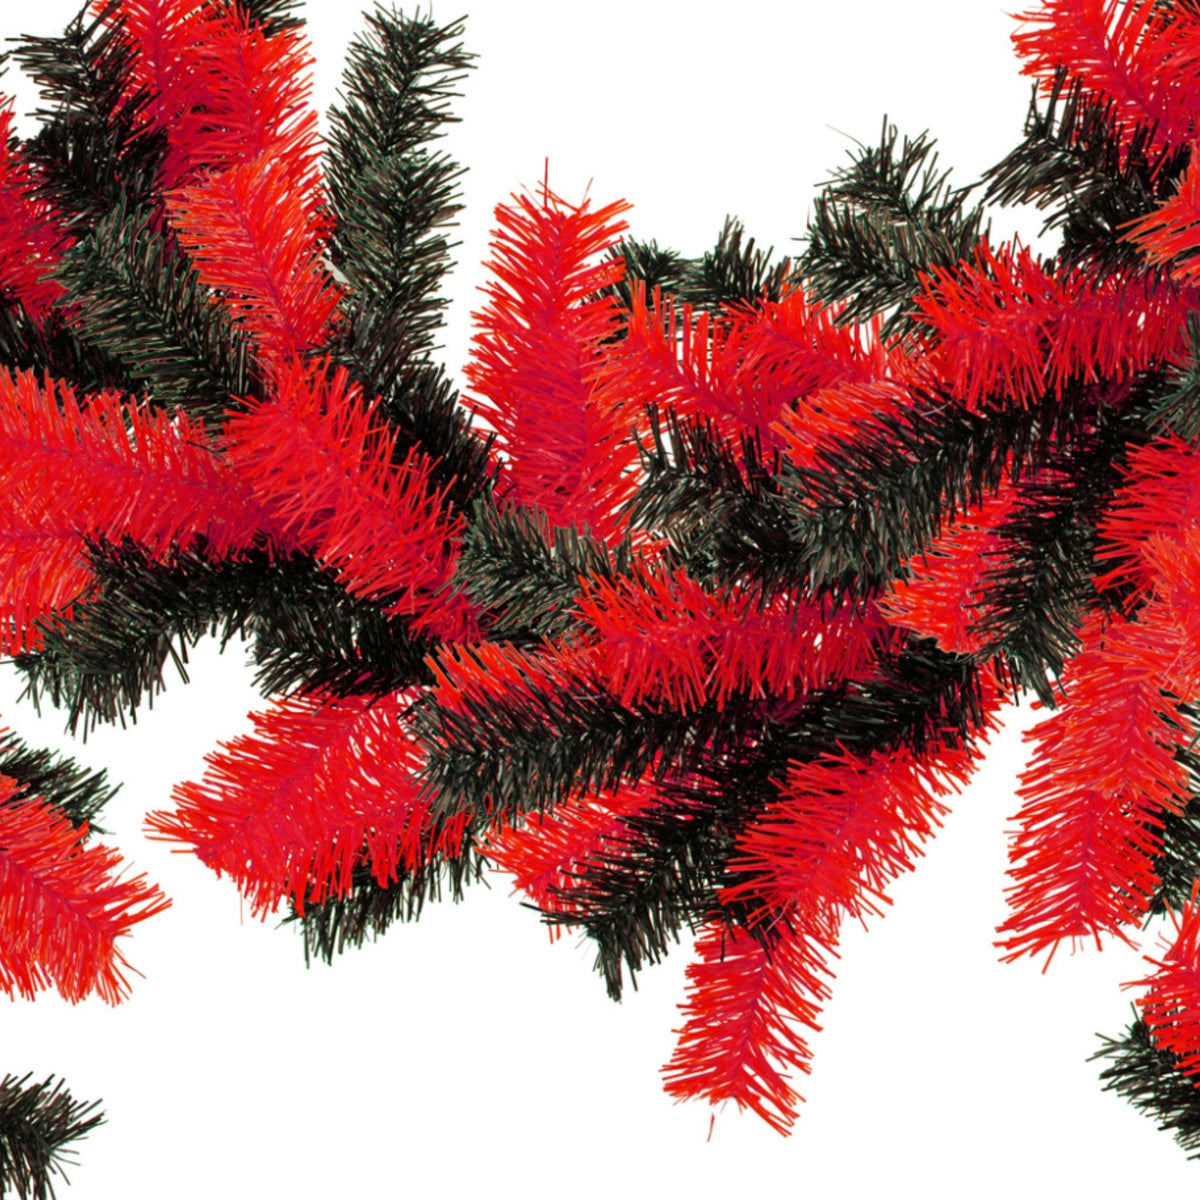 Shop for Lee Display's brand new 6FT Shiny Metallic Red and Black Tinsel Brush Garlands on sale now at leedisplay.com.  Middle